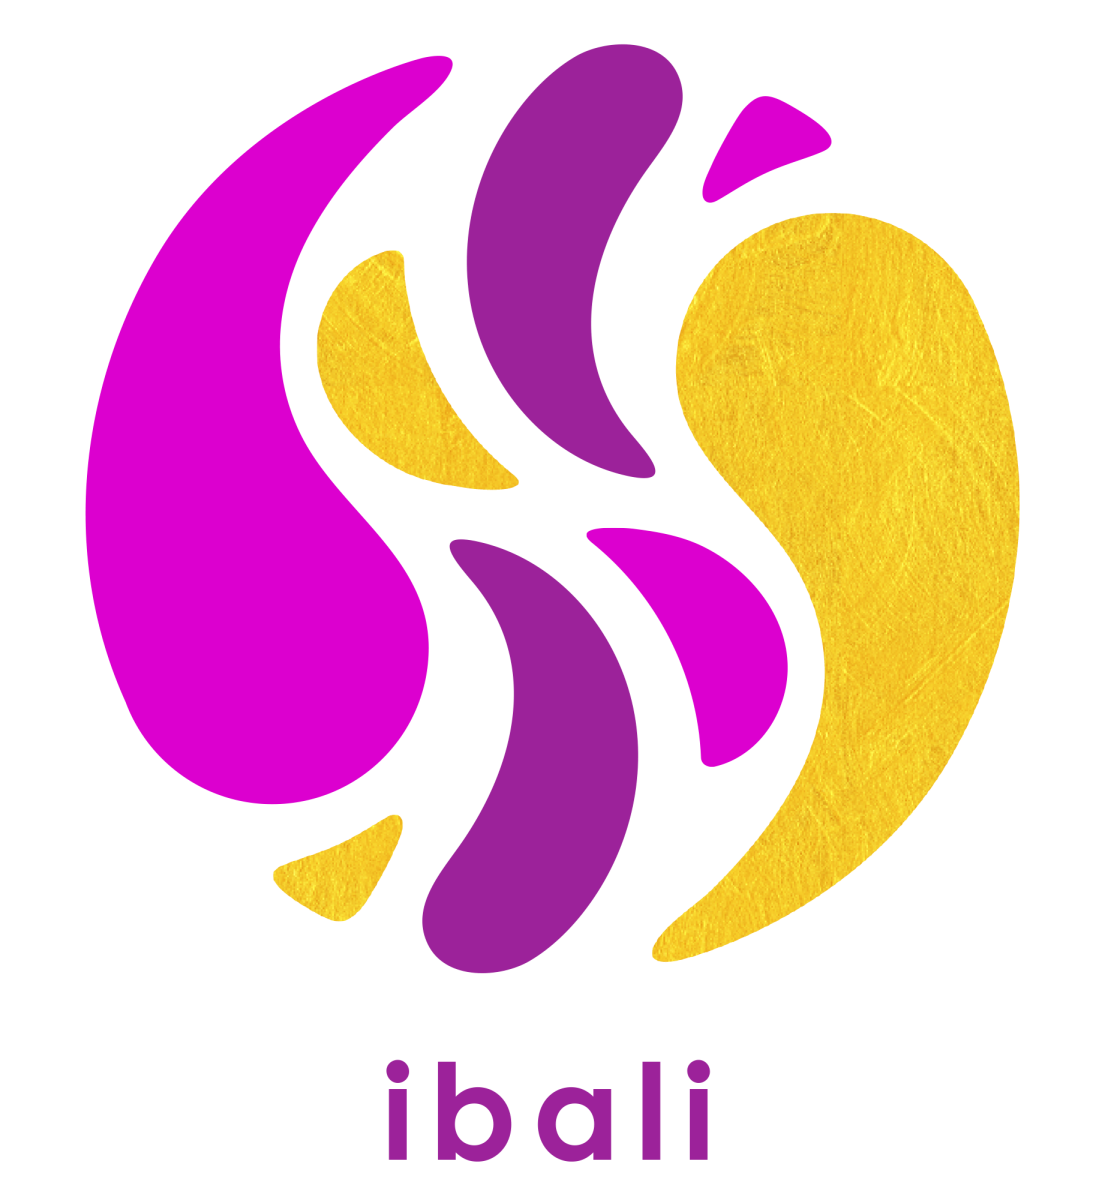 Group logo for Ibali, a circle containing yellow and purple swirls